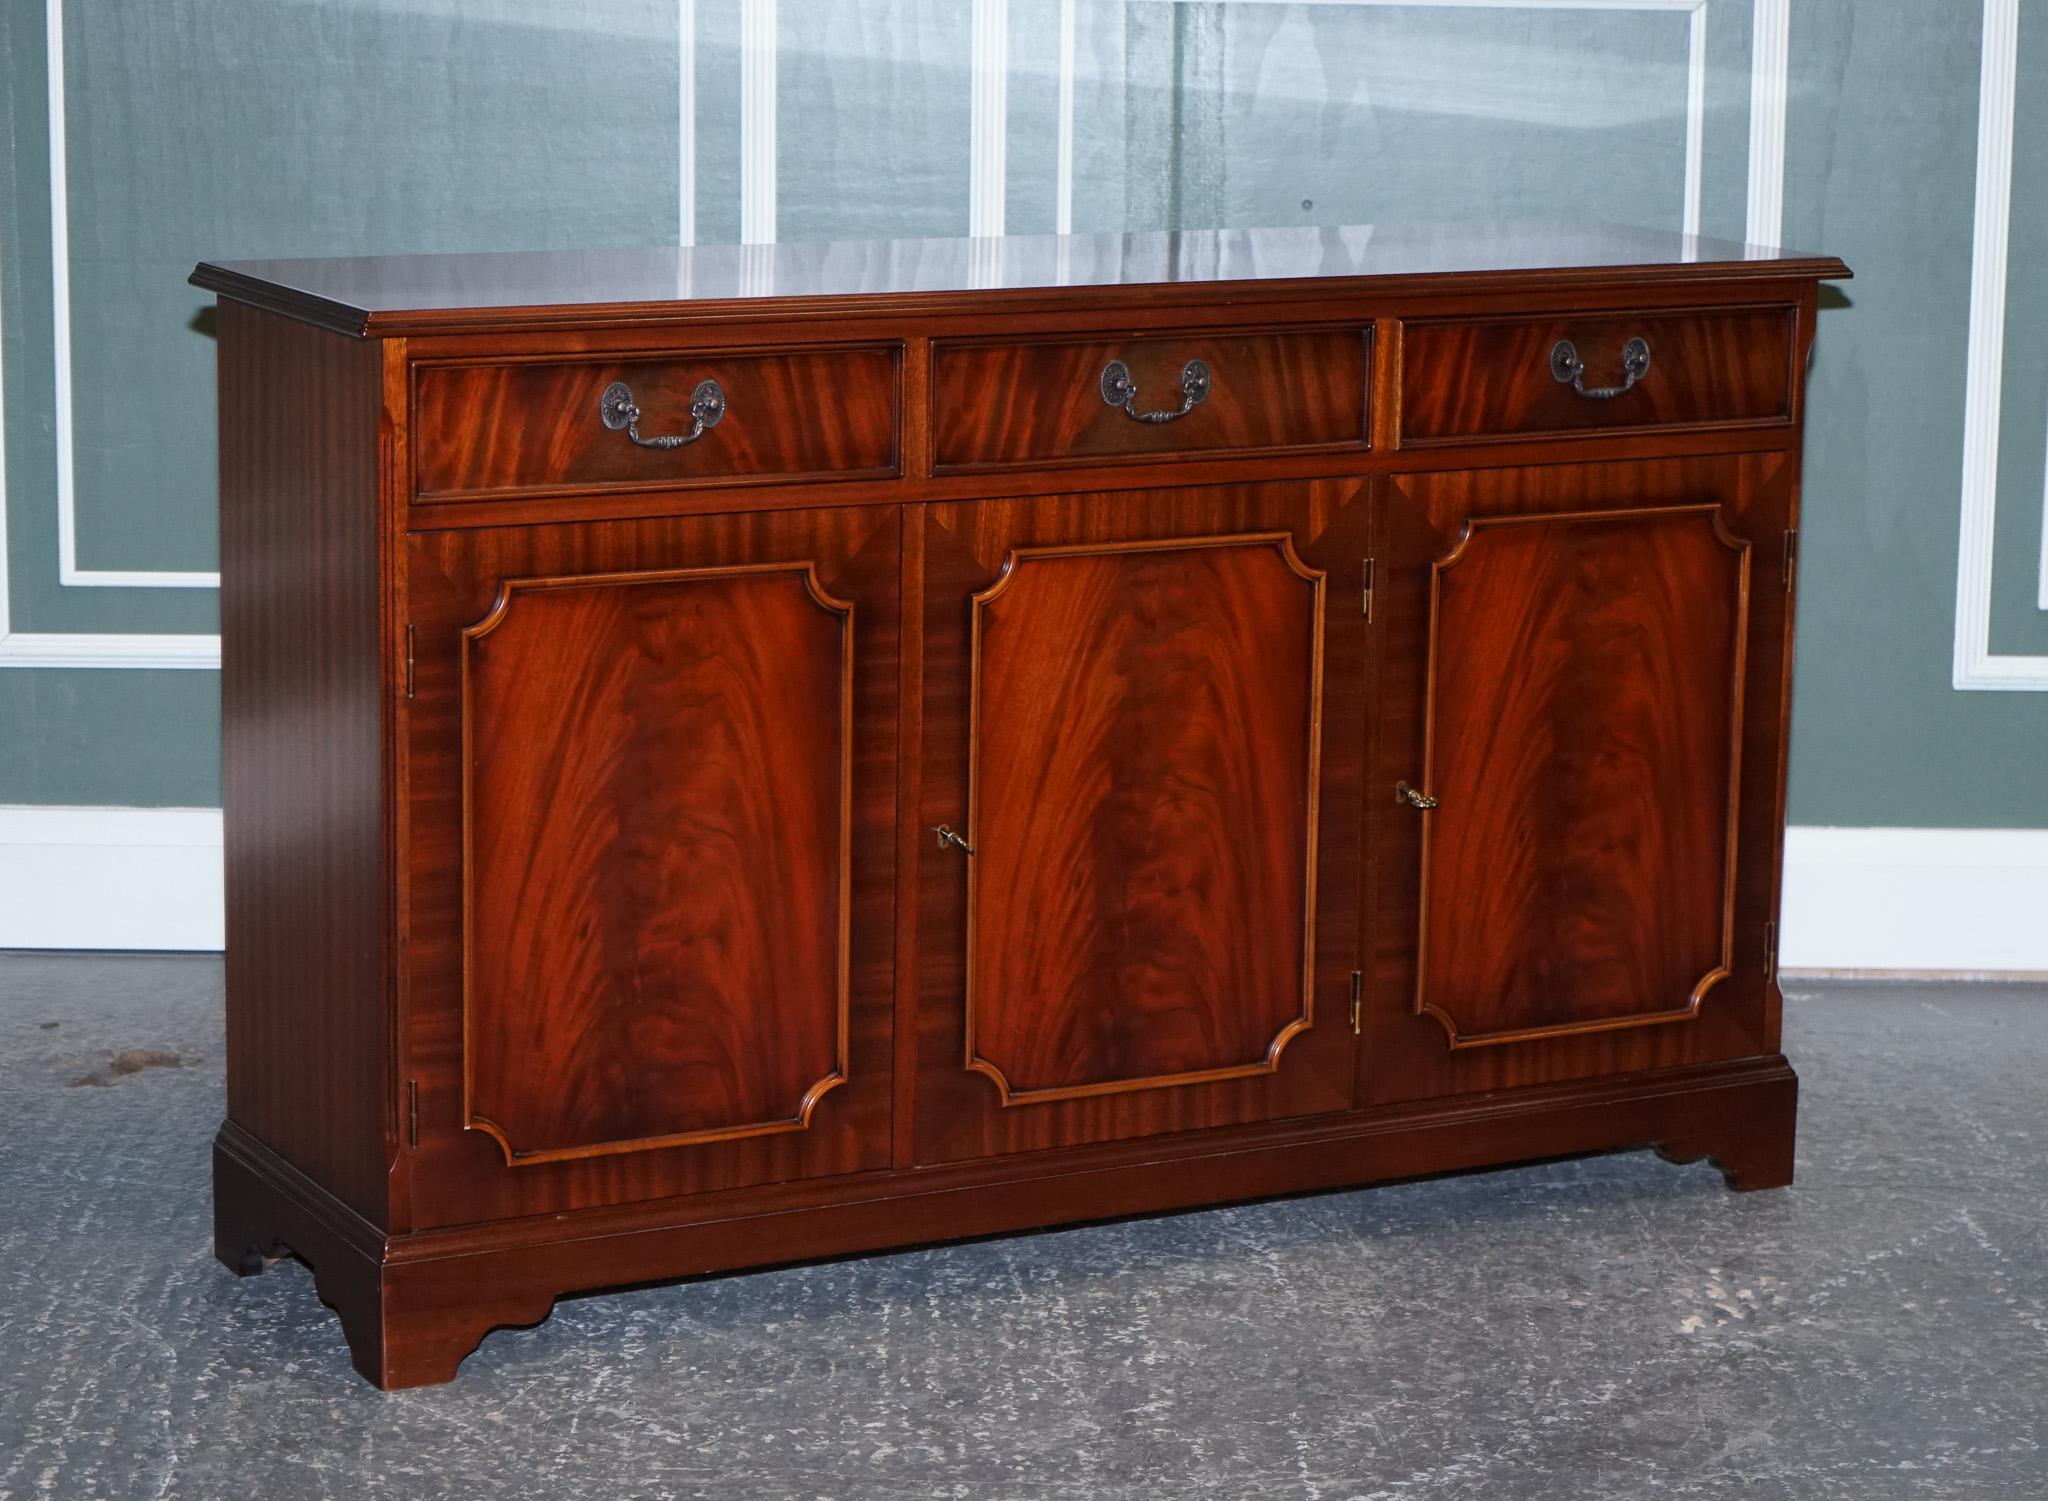 We are delighted to offer for sale this Beautiful Three Door Flamed Hardwood Sideboard Buffet.

A flamed hardwood sideboard is an elegant piece of furniture typically used for storage or for displaying decorative items. It is made from